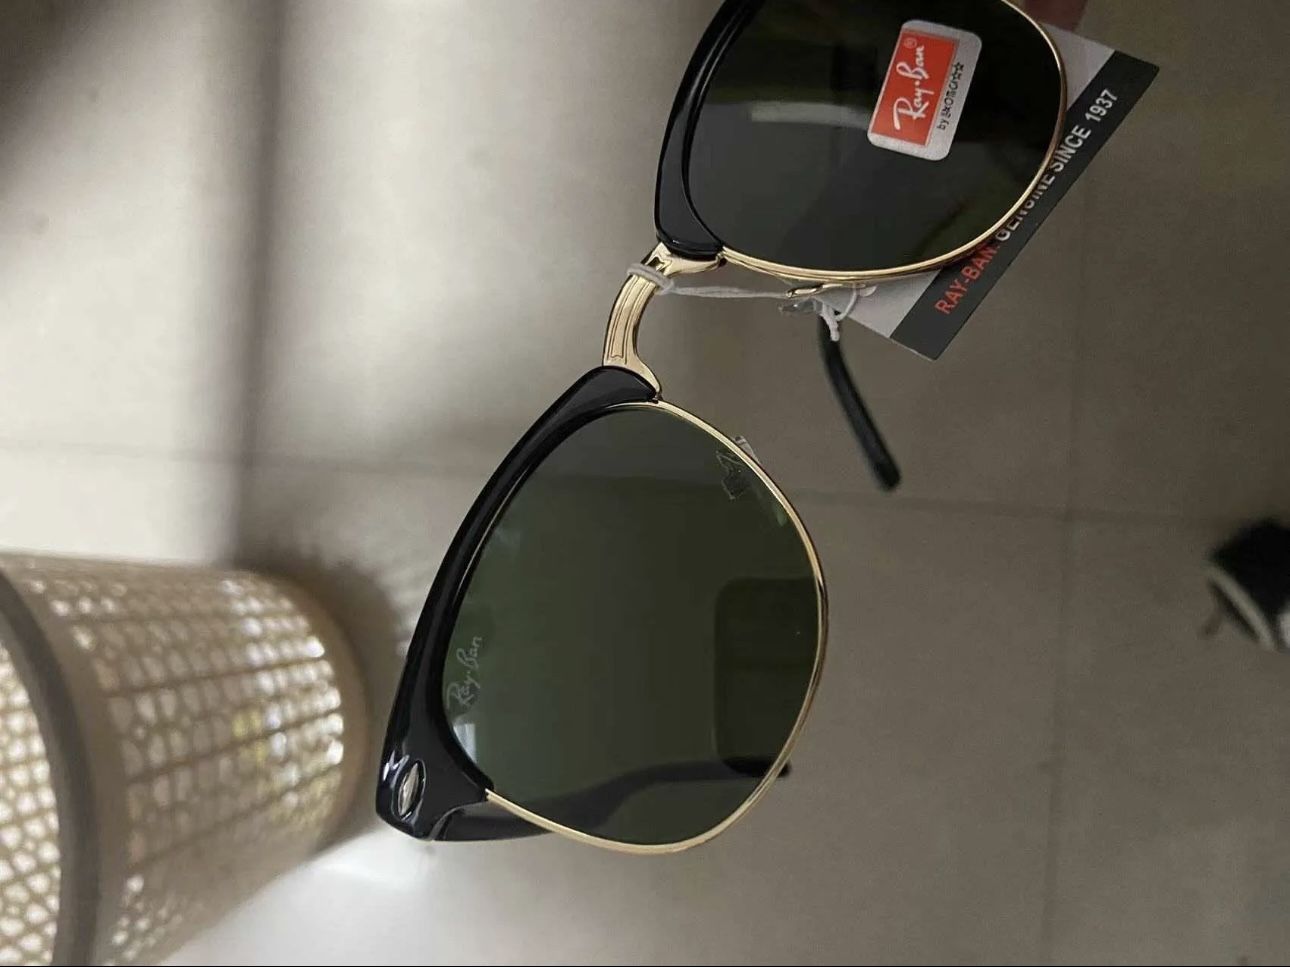 RayBan Clubmasters